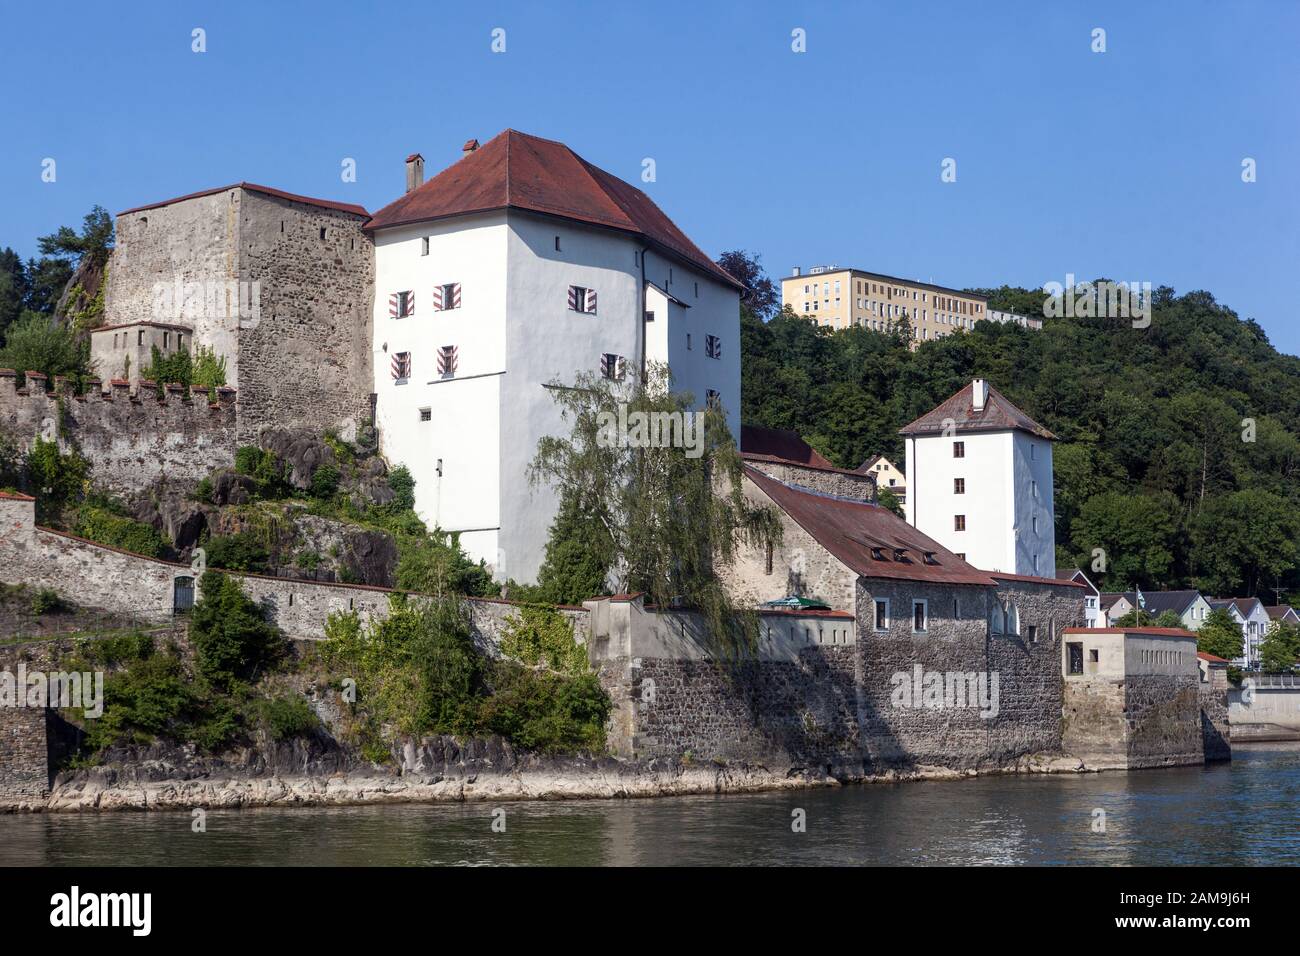 Fortress Veste Niederhaus above the confluence of the rivers Danube and Ilz, Passau Germany Stock Photo